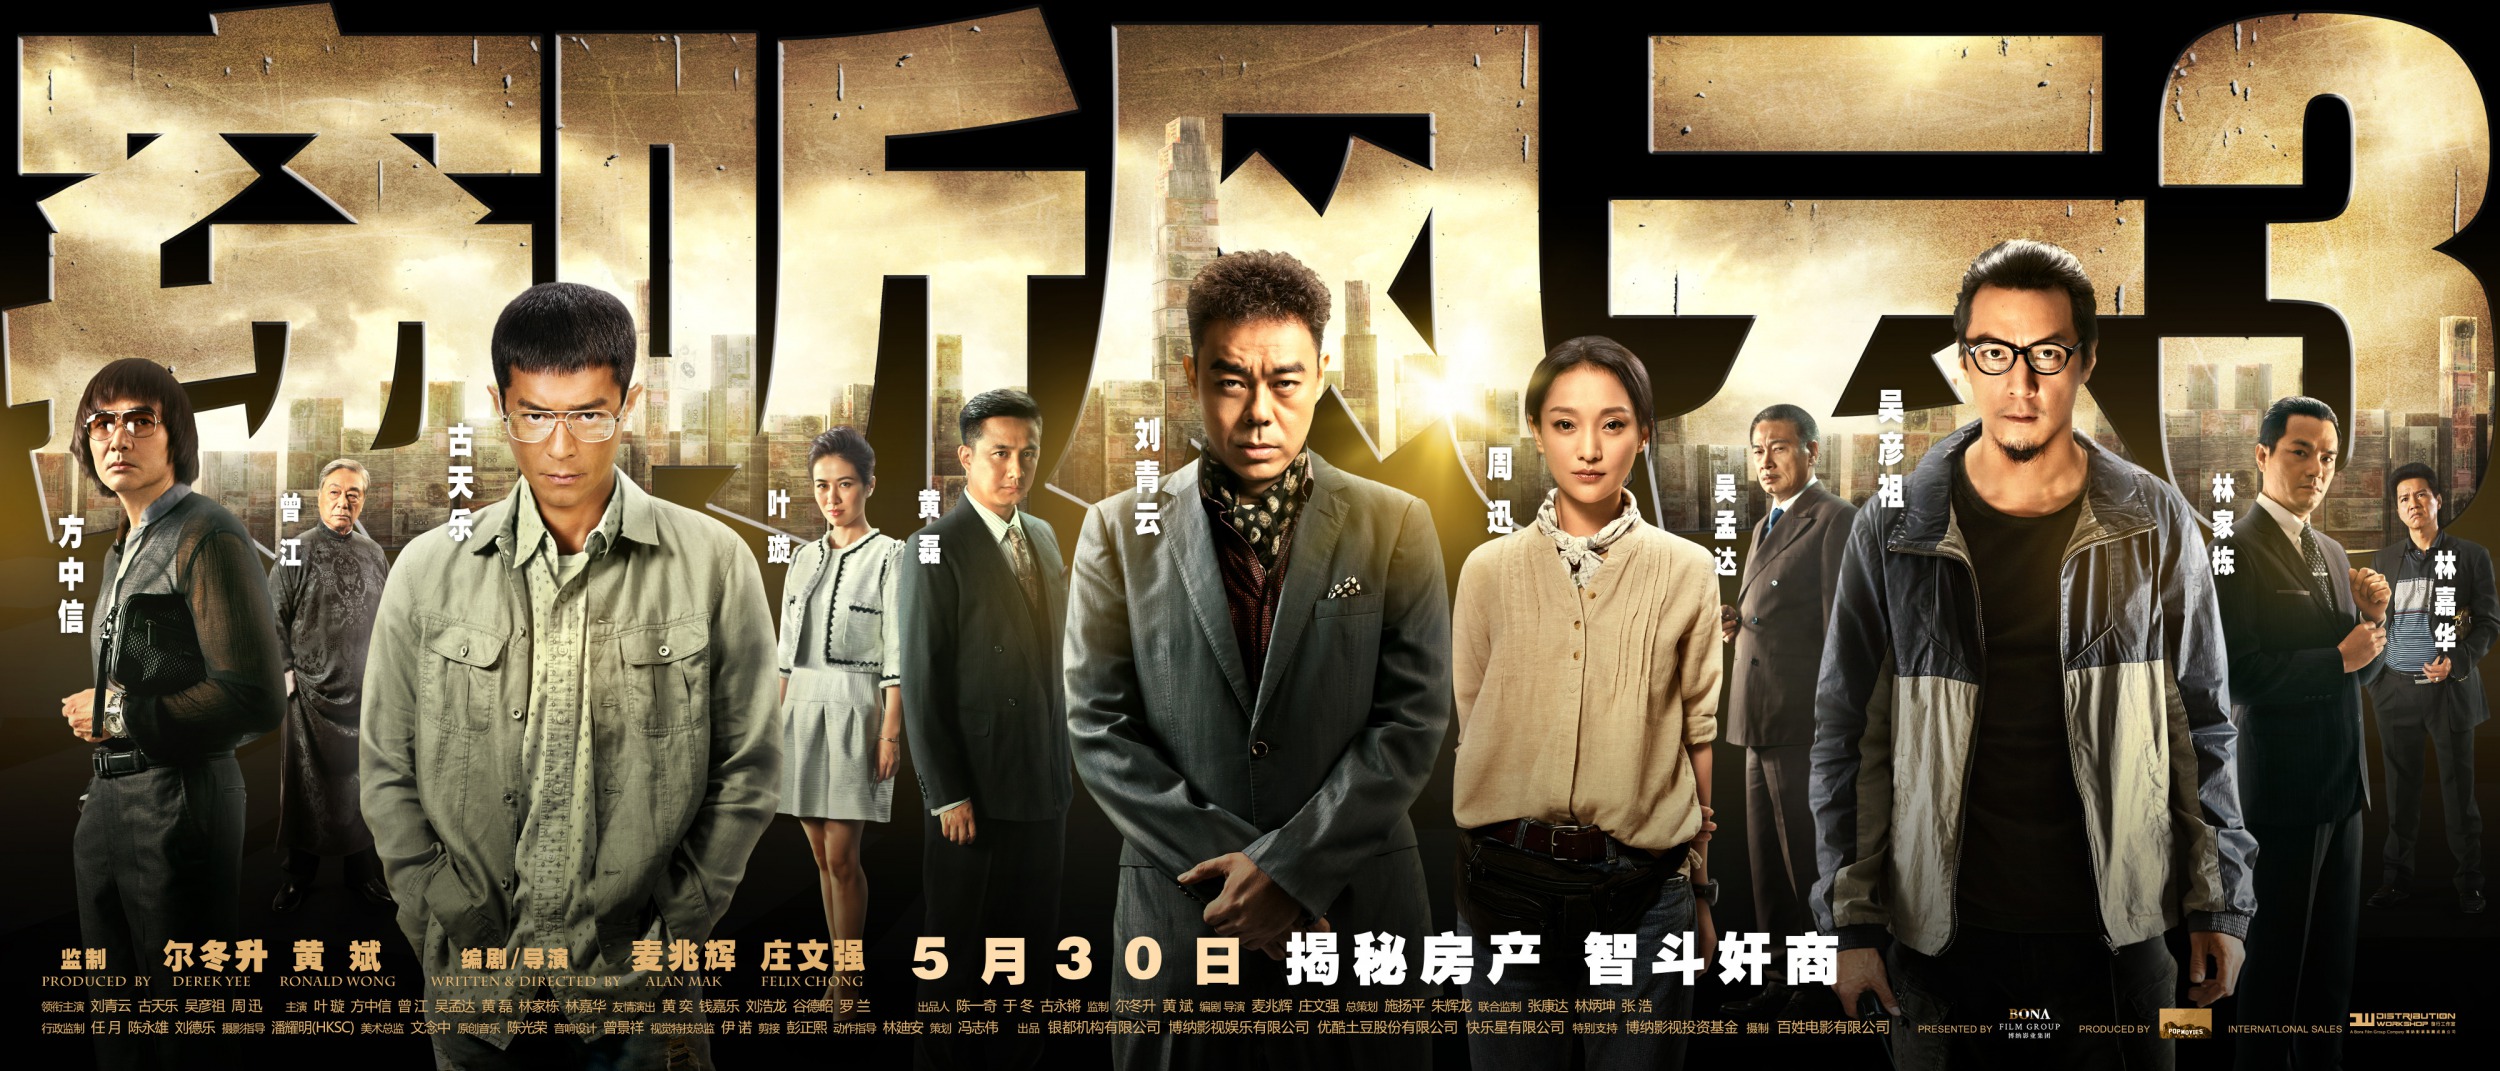 Mega Sized Movie Poster Image for Sit ting fung wan 3 (#6 of 7)